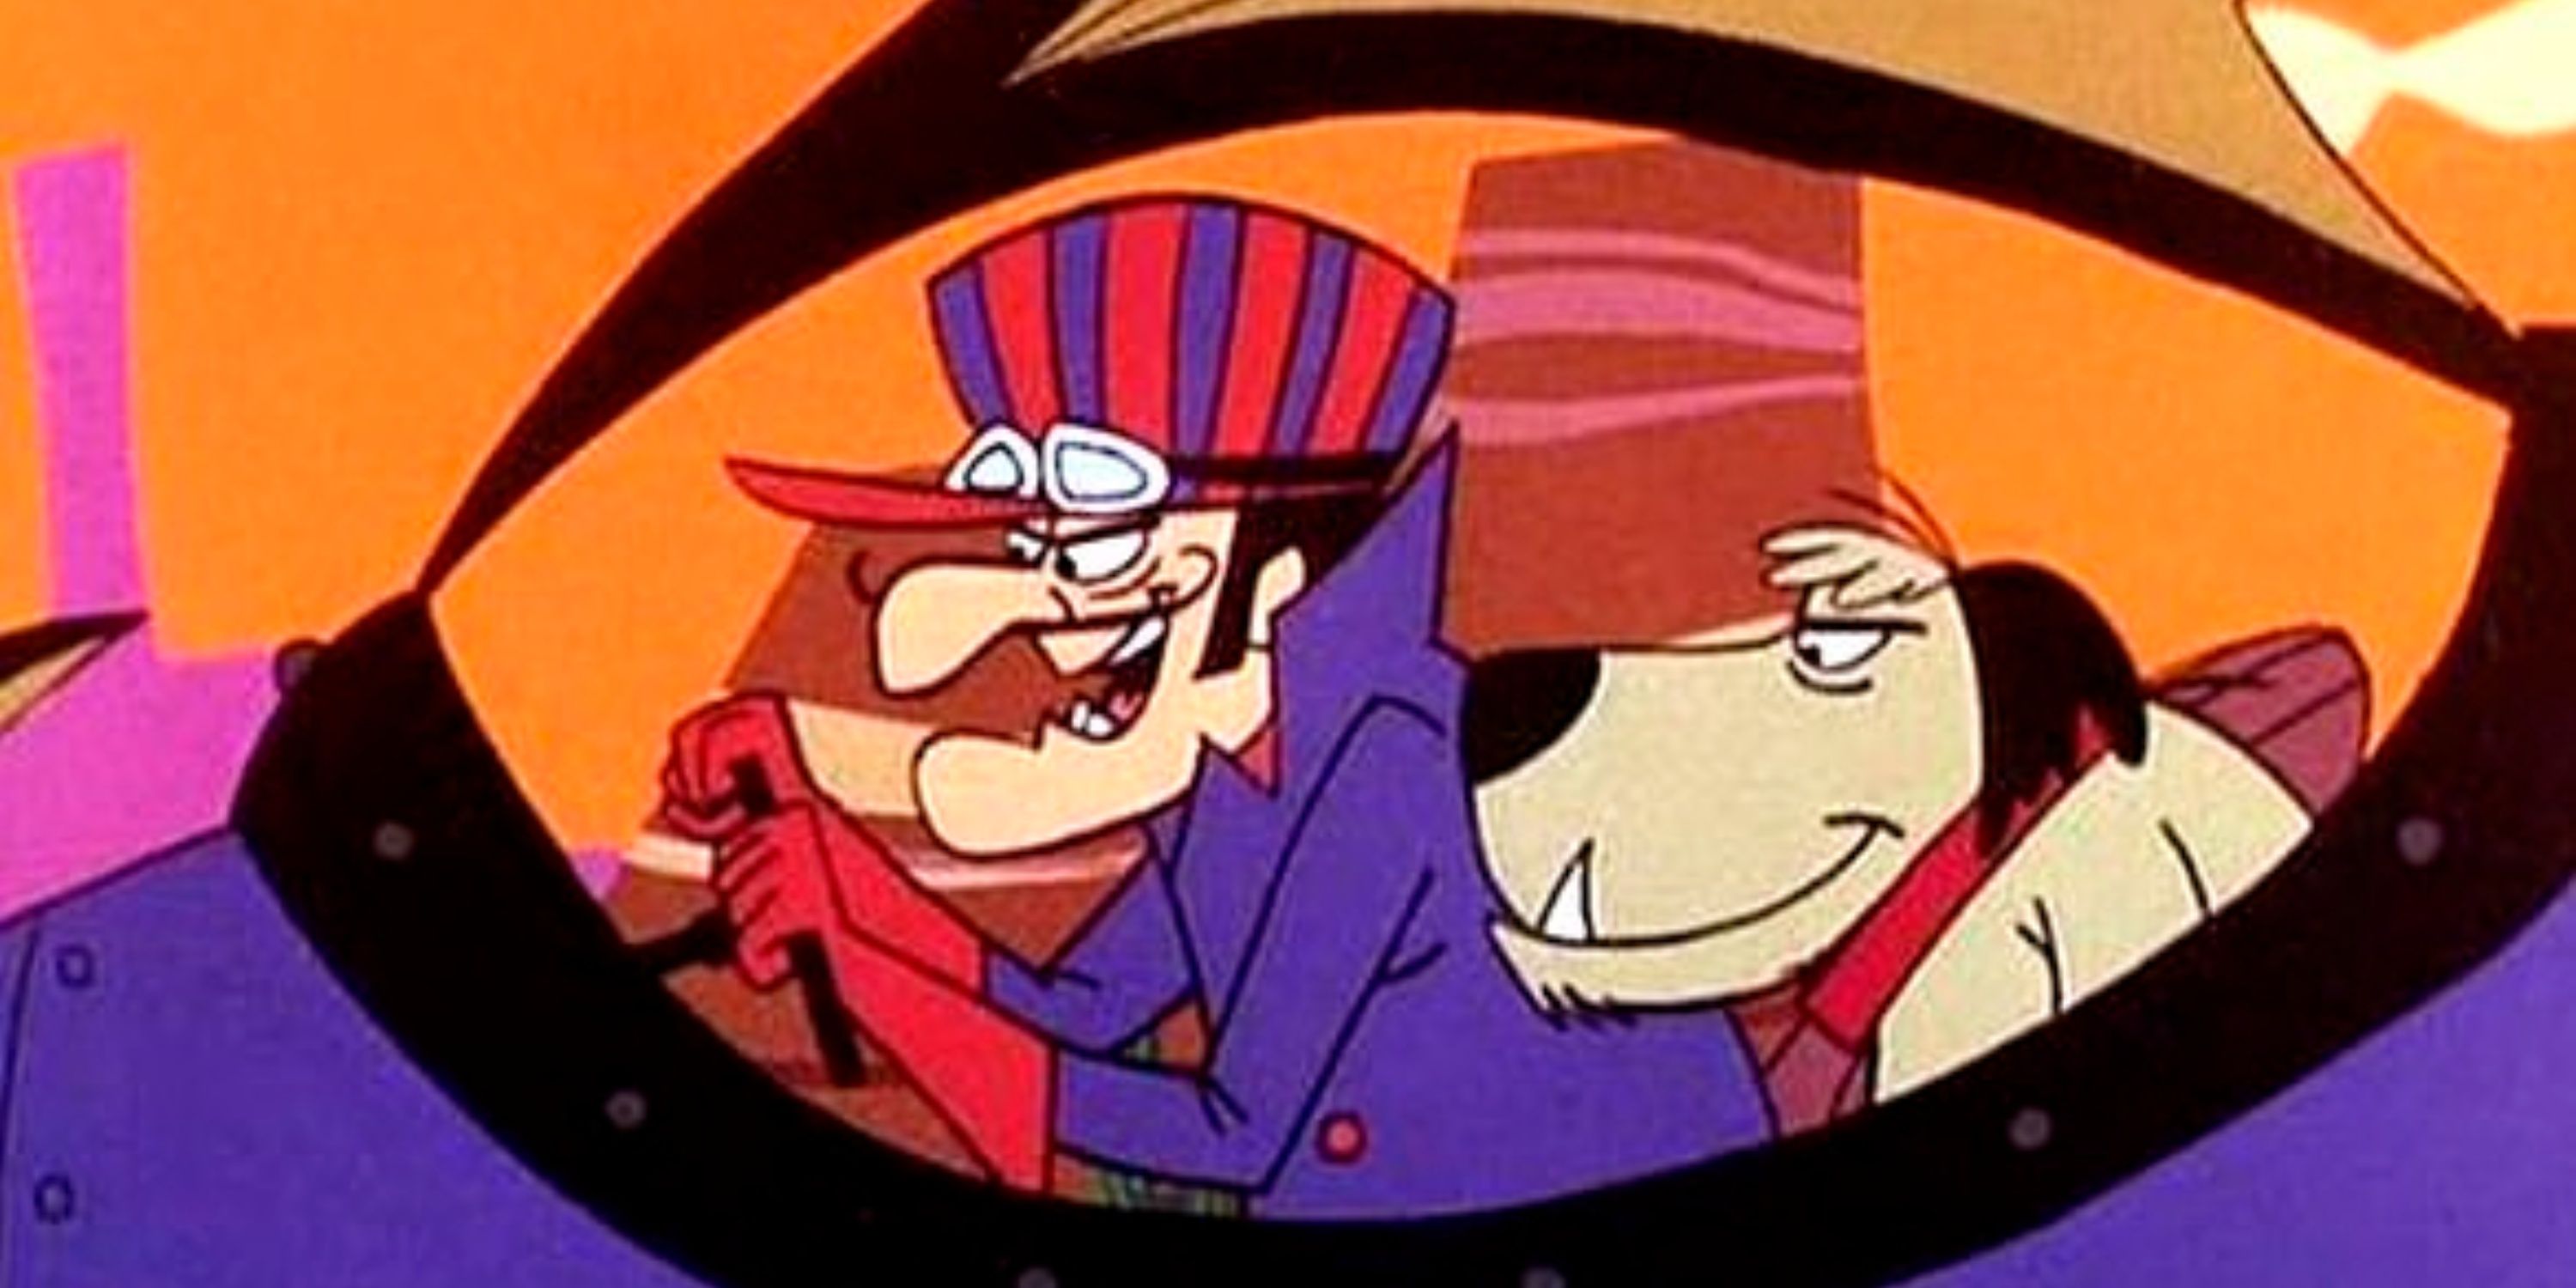 10 Most Iconic Hanna Barbera Duos Ranked